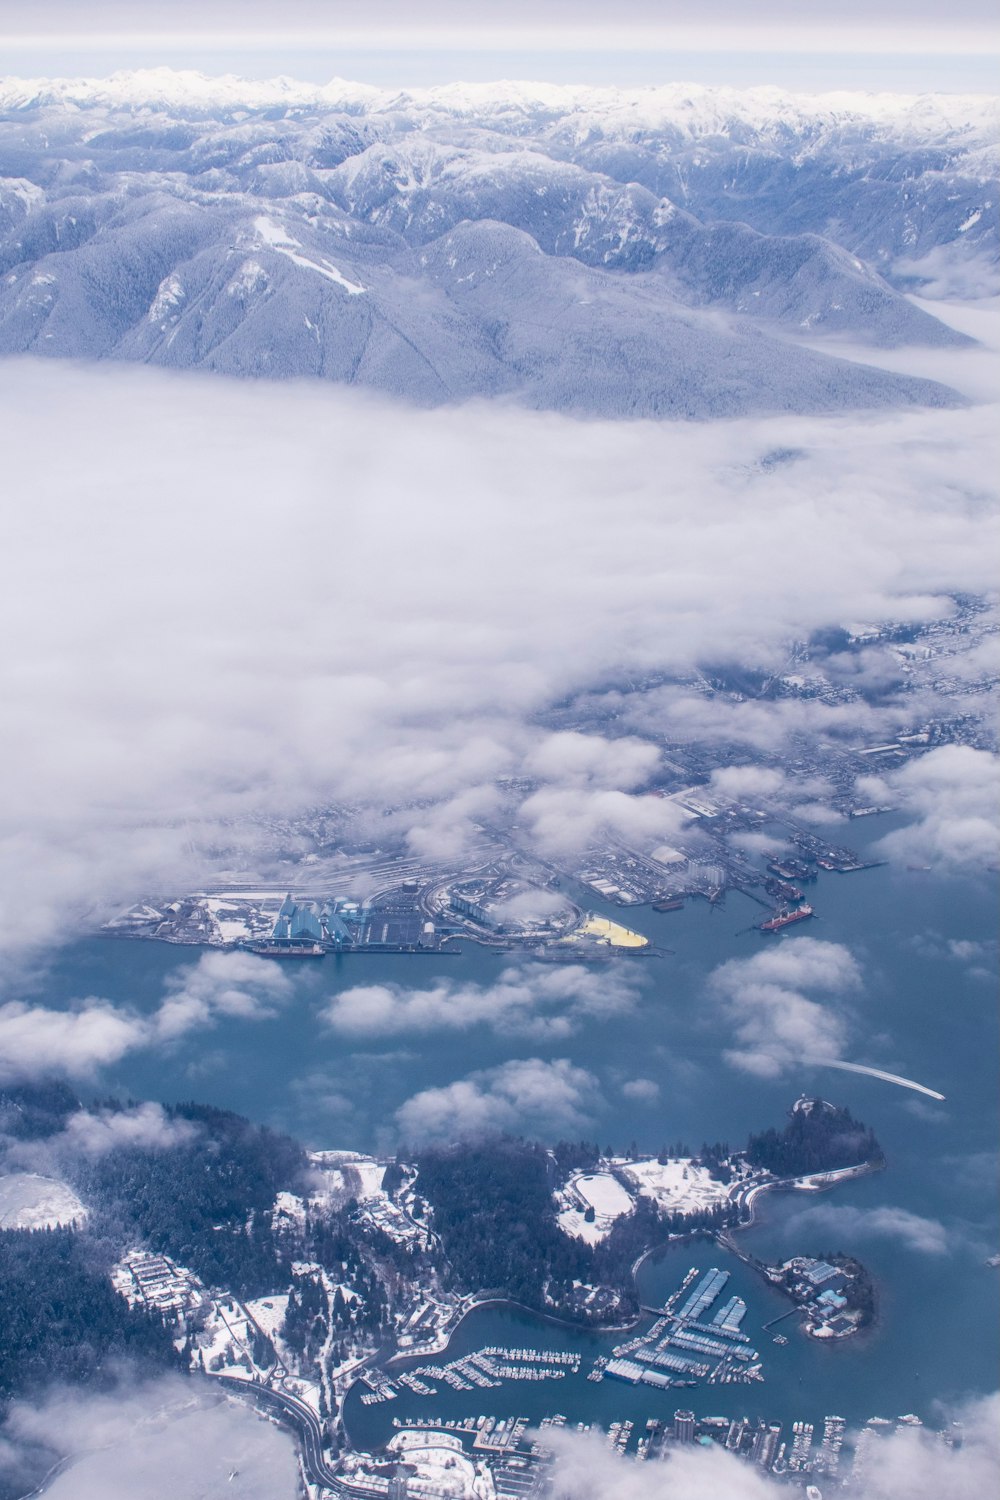 an aerial view of a large body of water surrounded by mountains